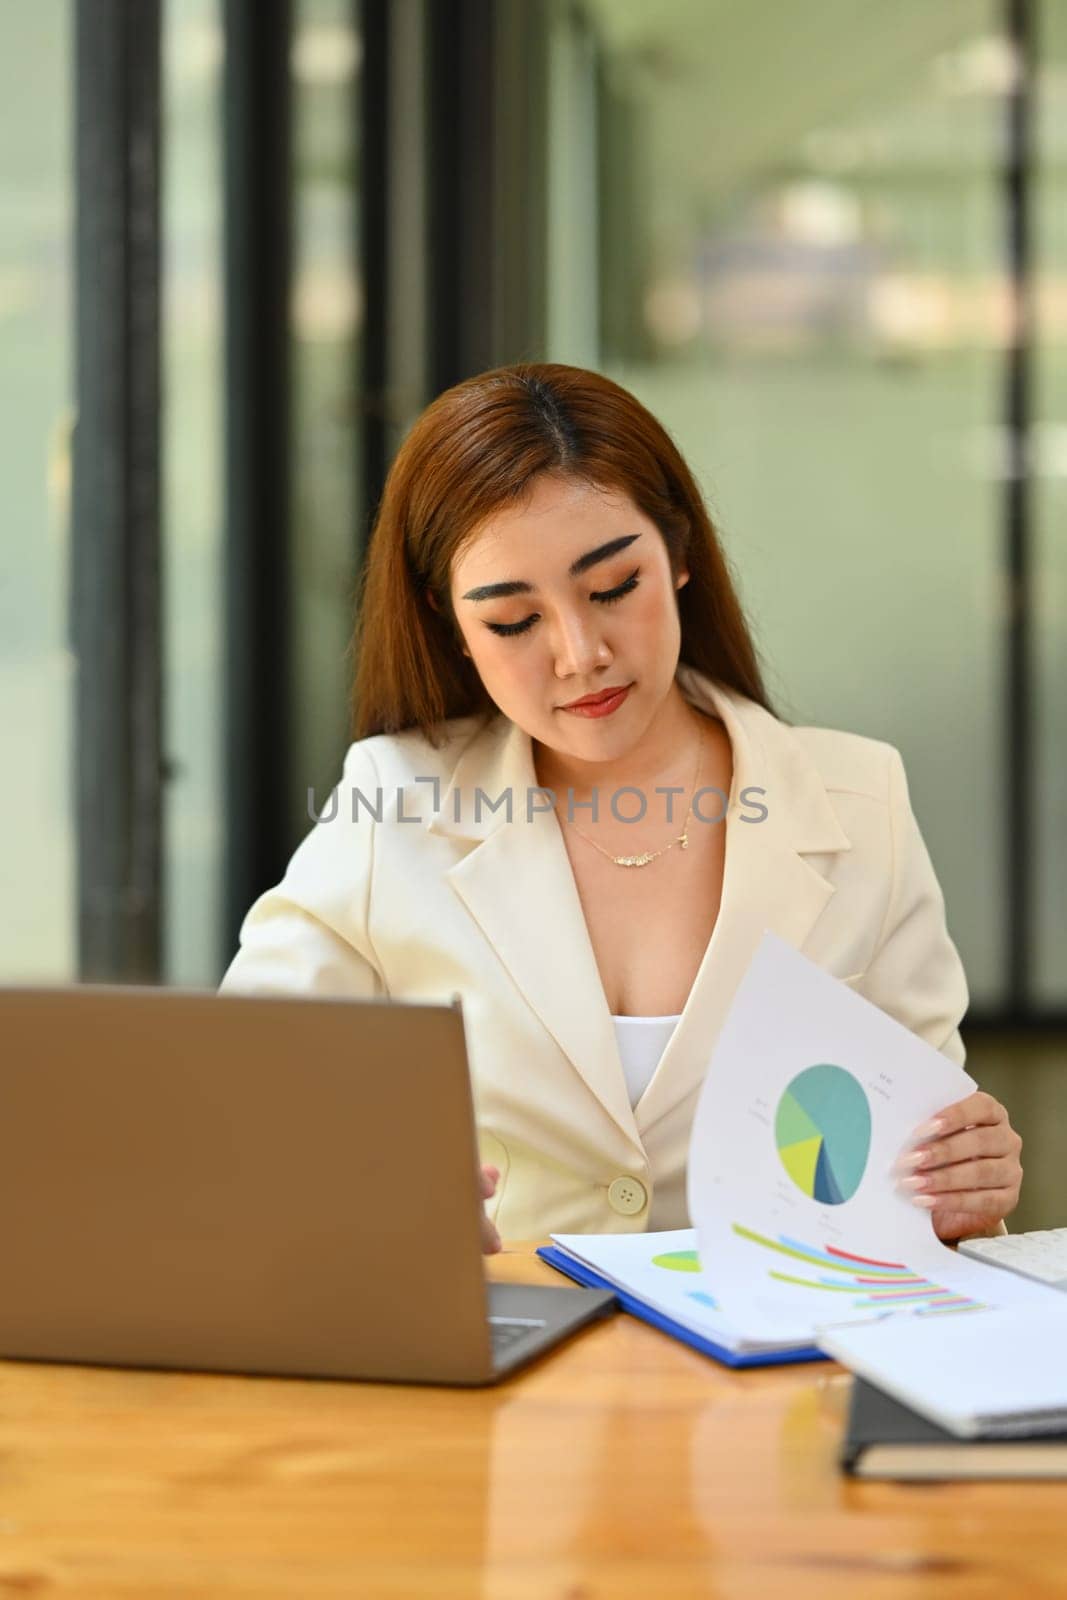 Focused female economist sitting at desk with laptop, reviewing marketing research results or statistics data.